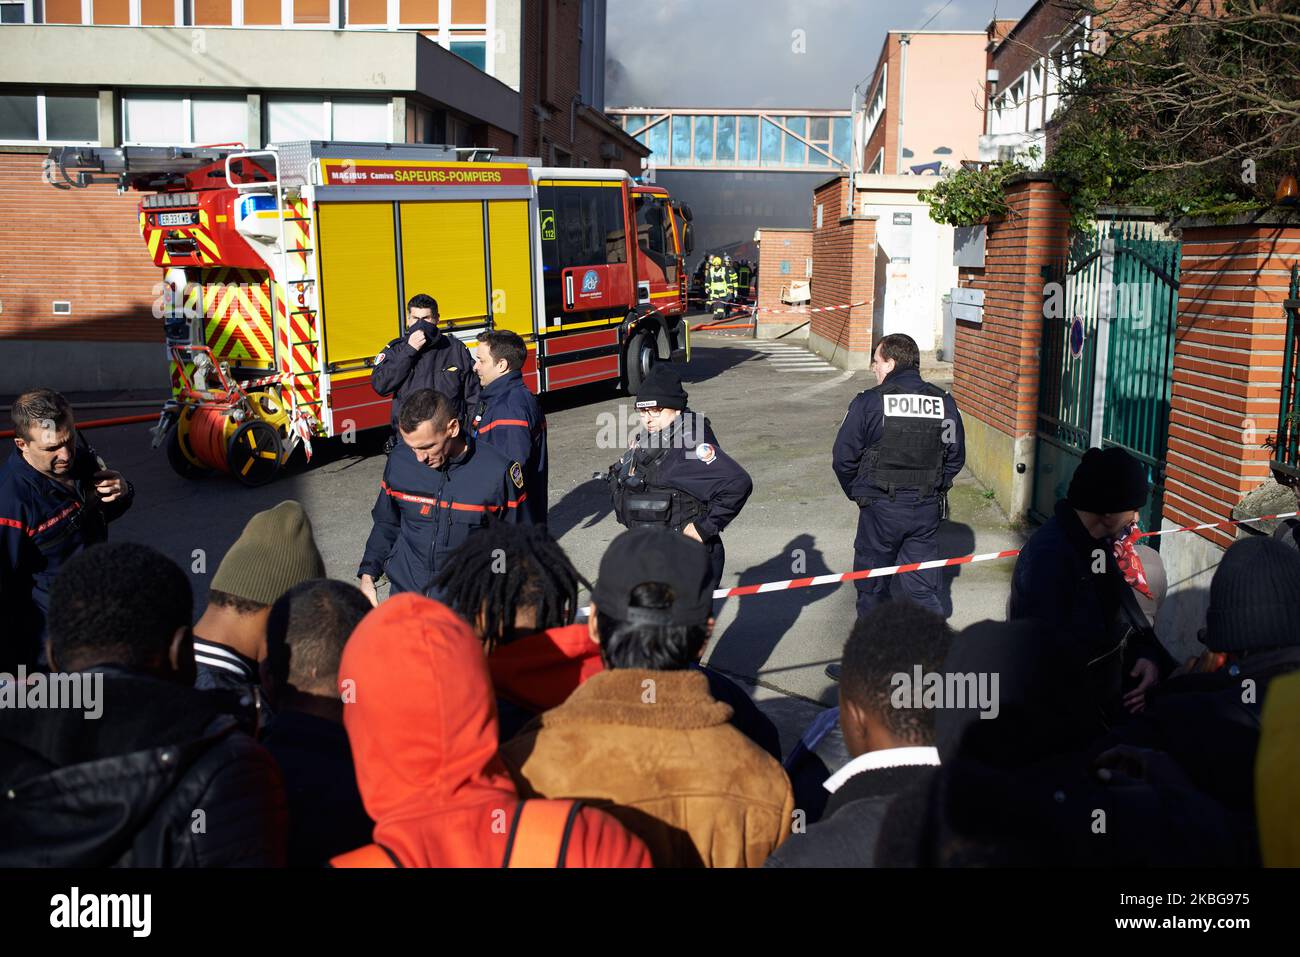 Firefighters and policemen during the operations to extinguish the blaze. A blaze happened in one of the wings of the biggest squat in Toulouse: the 'Squat Russel'. More than 500 people lived there before the blaze. They left nearly all their belongings in the building. There were no casualties People from the squat came from West Africa, Albania, Bulgaria, etc. However, some french students live in this squat. The SAMU (Emergency medical service) and 94 firemen intervened on this fire. The majority of squatters were evacuated to gymnasiums. Toulouse. France. February 4th 2019. (Photo by Alain Stock Photo